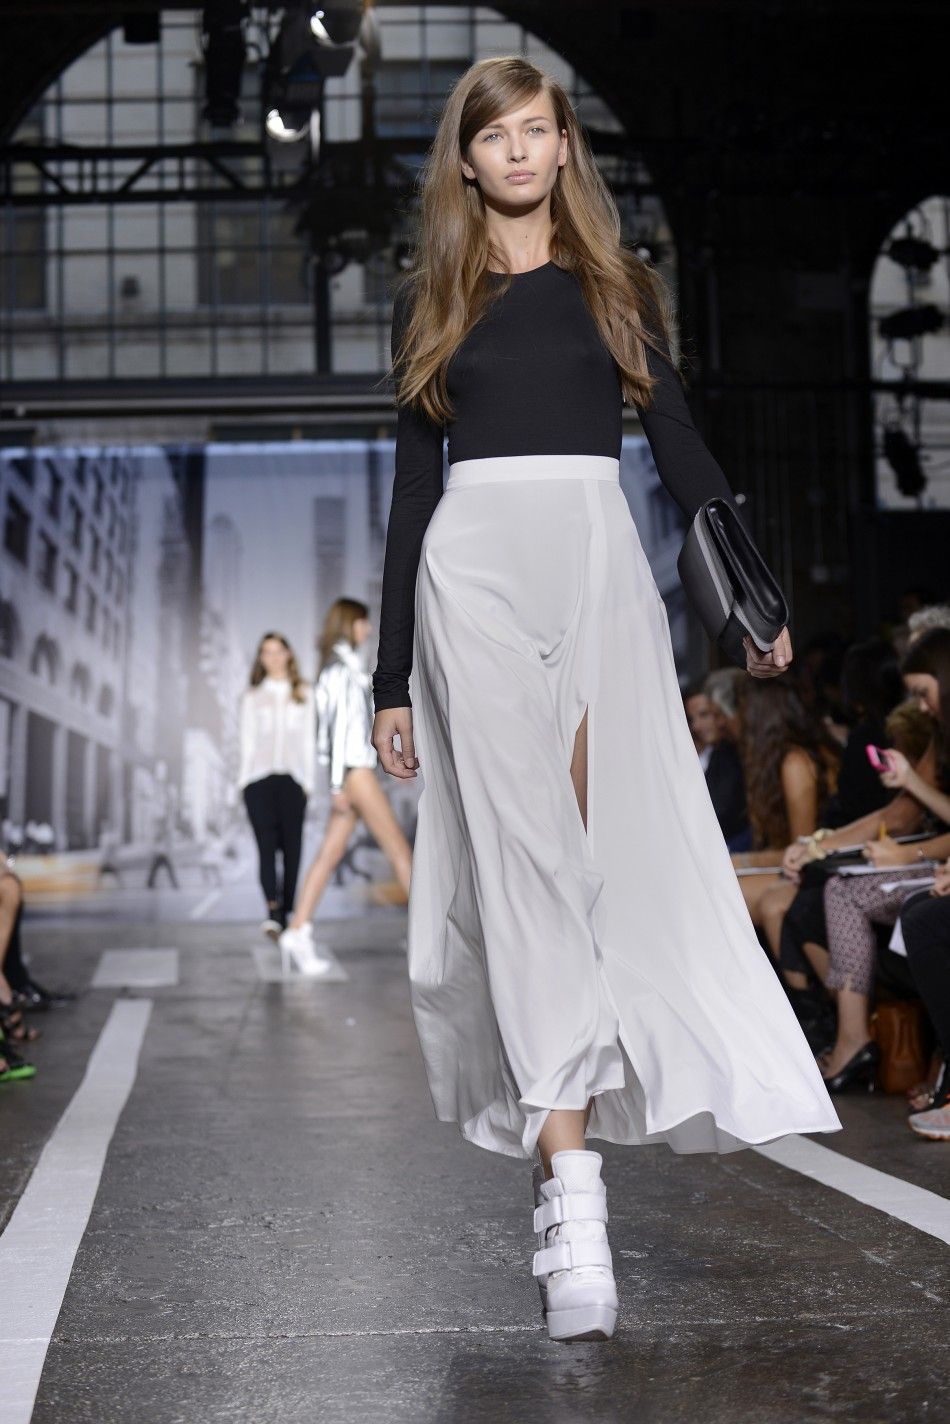 DKNY By Donna Karan Is Cool New Yorker For Spring 2013 At New York Fashion  Week [PHOTOS]